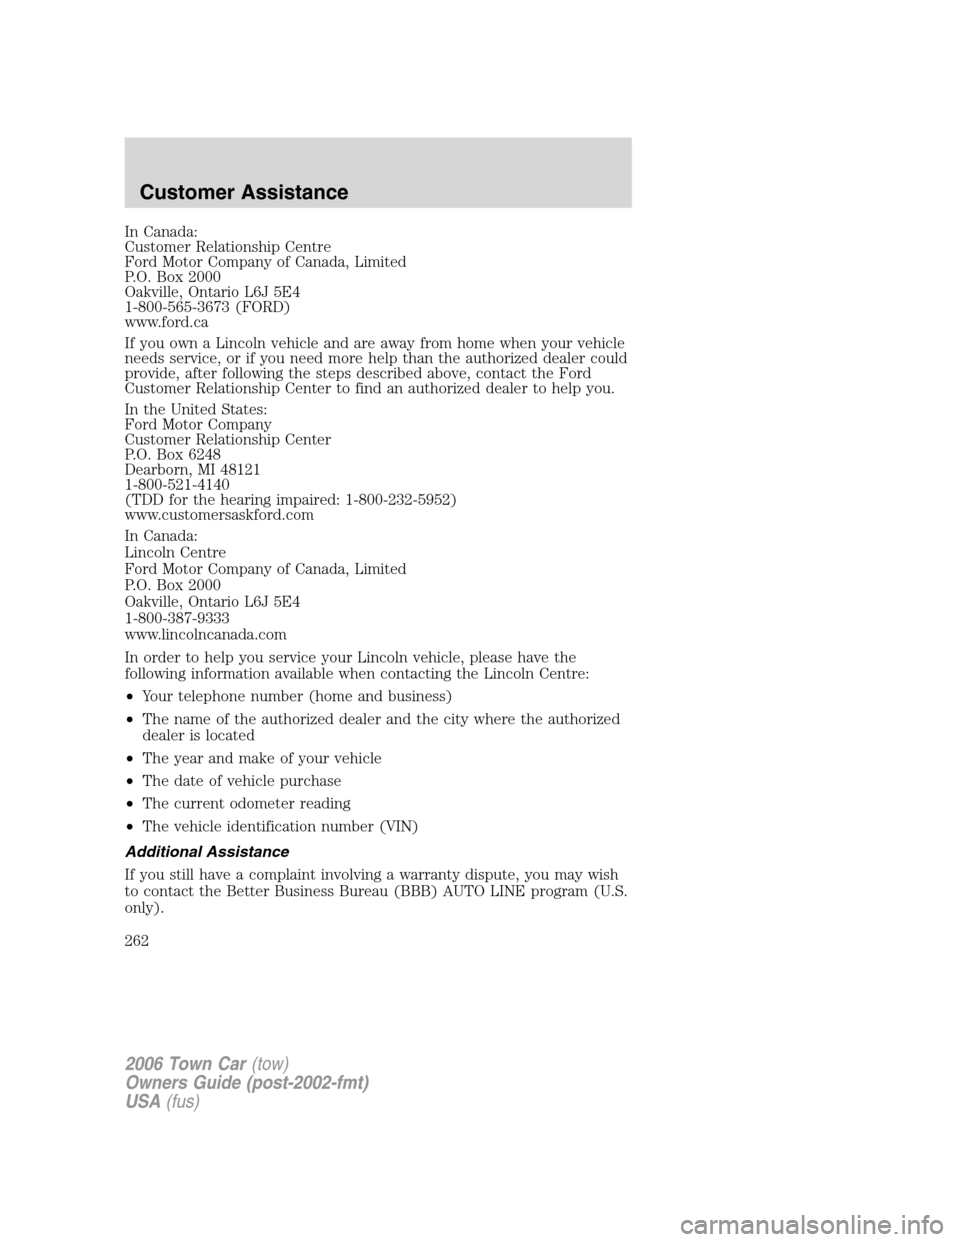 LINCOLN TOWN CAR 2006  Owners Manual In Canada:
Customer Relationship Centre
Ford Motor Company of Canada, Limited
P.O. Box 2000
Oakville, Ontario L6J 5E4
1-800-565-3673 (FORD)
www.ford.ca
If you own a Lincoln vehicle and are away from h